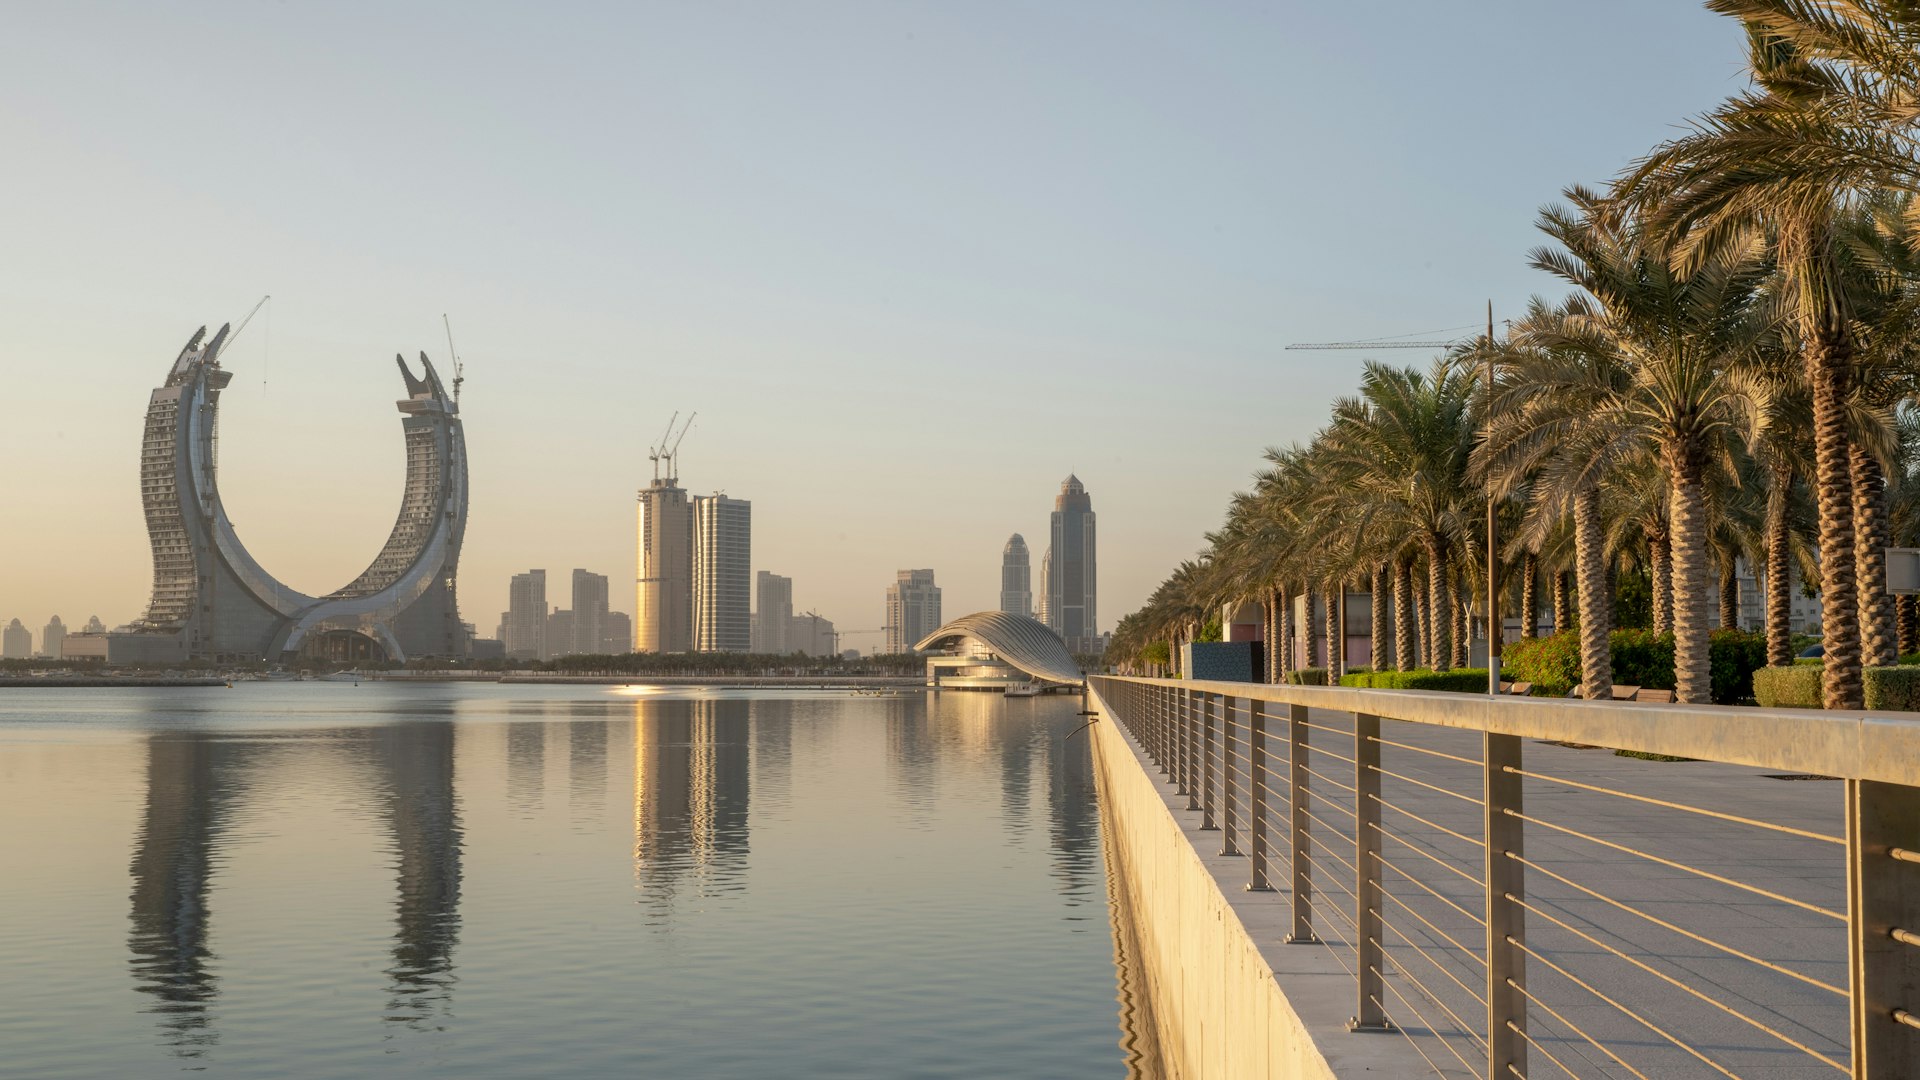 The skyscrapers of the newly-developing modern city of Lusail photographed at sunrise